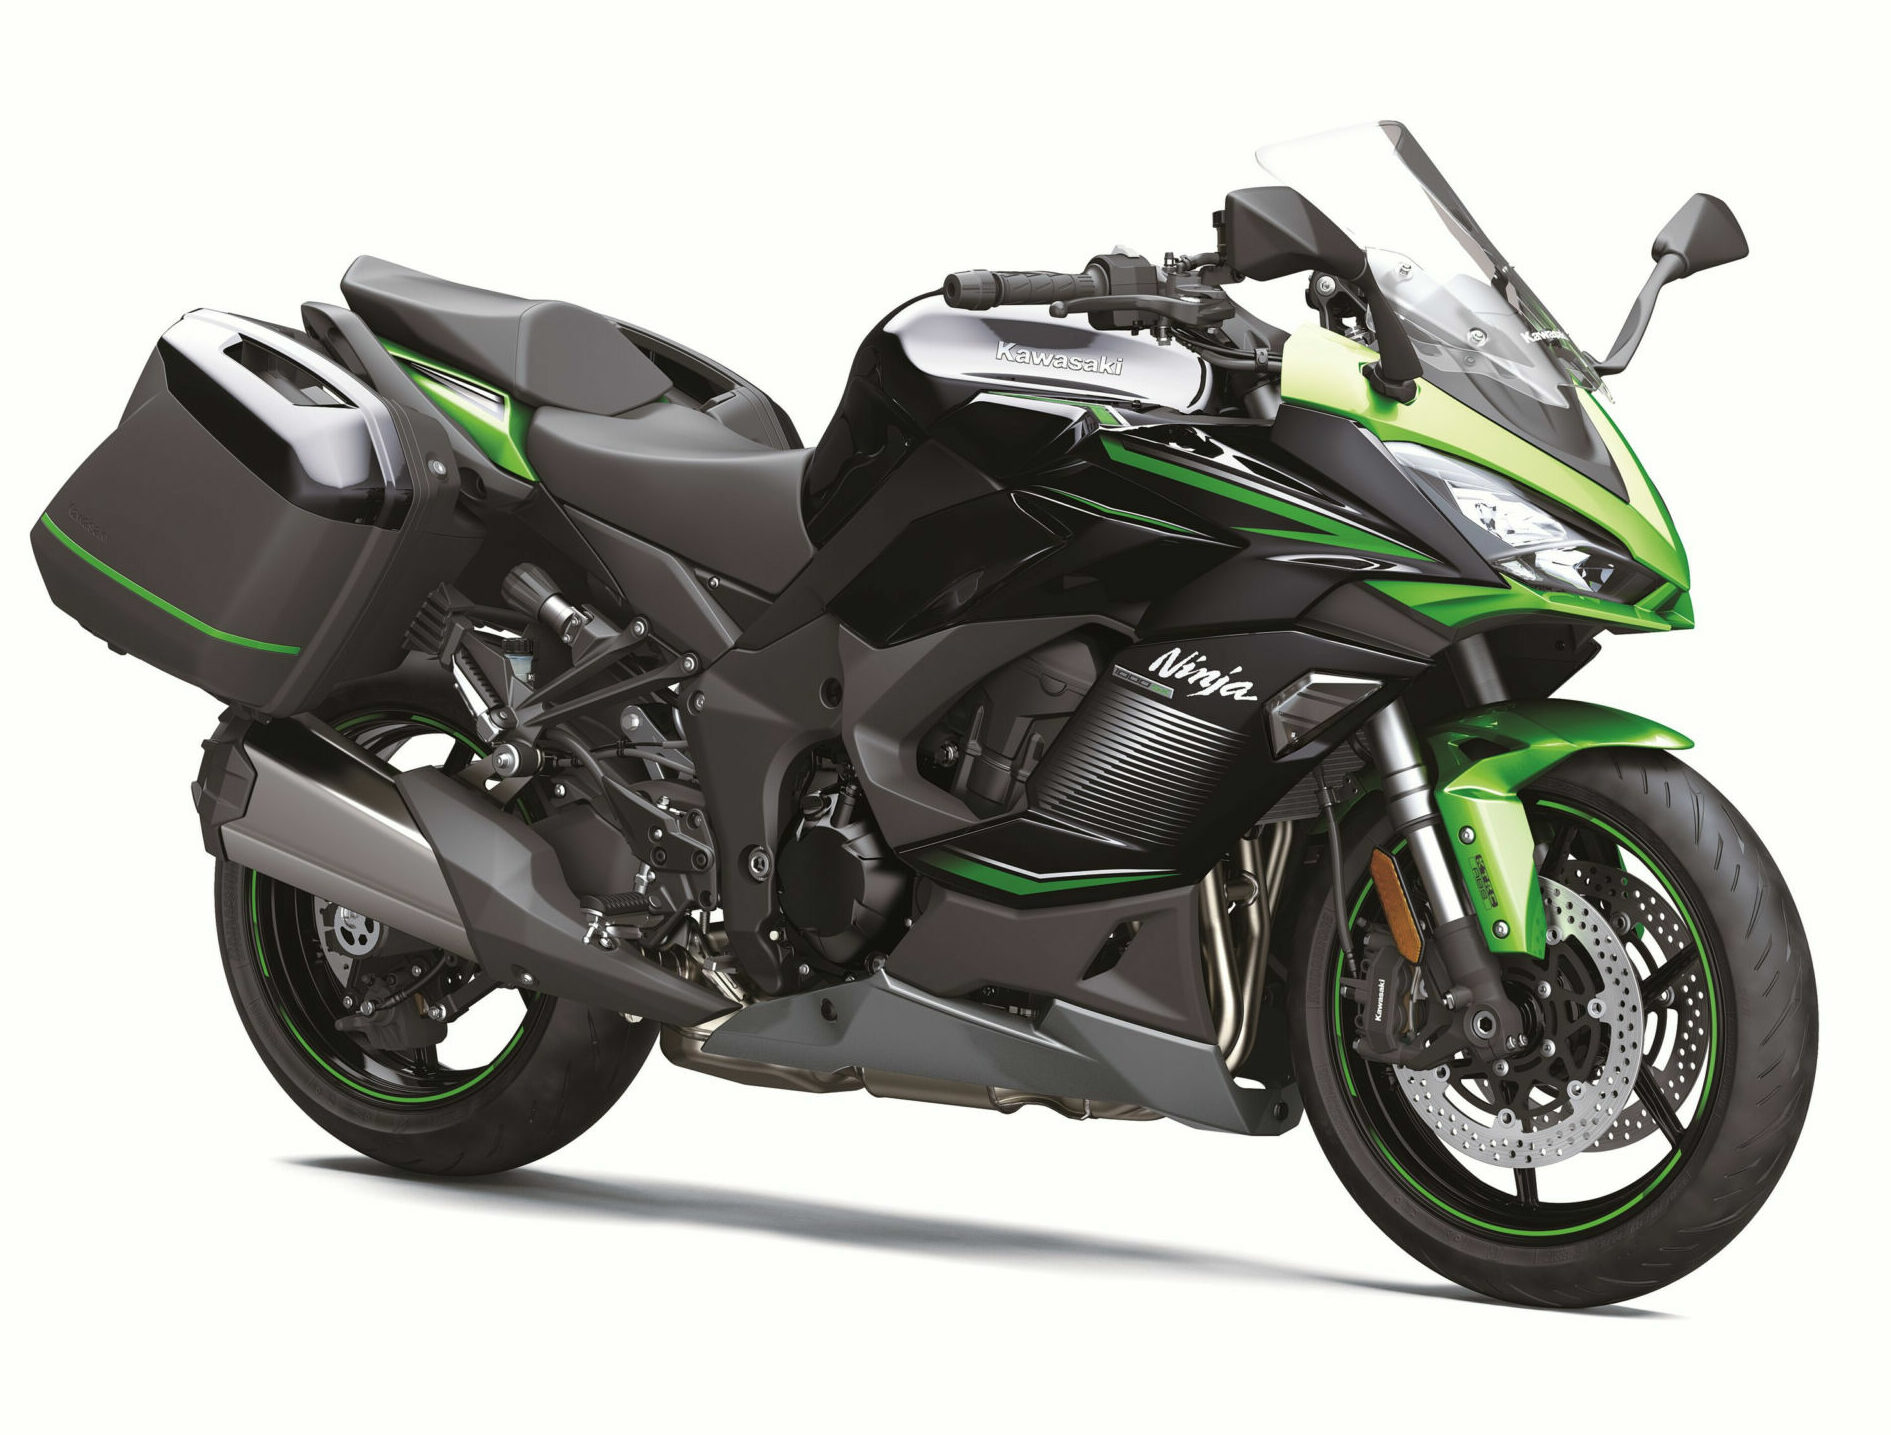 Kawasaki Announces Early Release Of Some 2023 Models Roadracing World Magazine Motorcycle